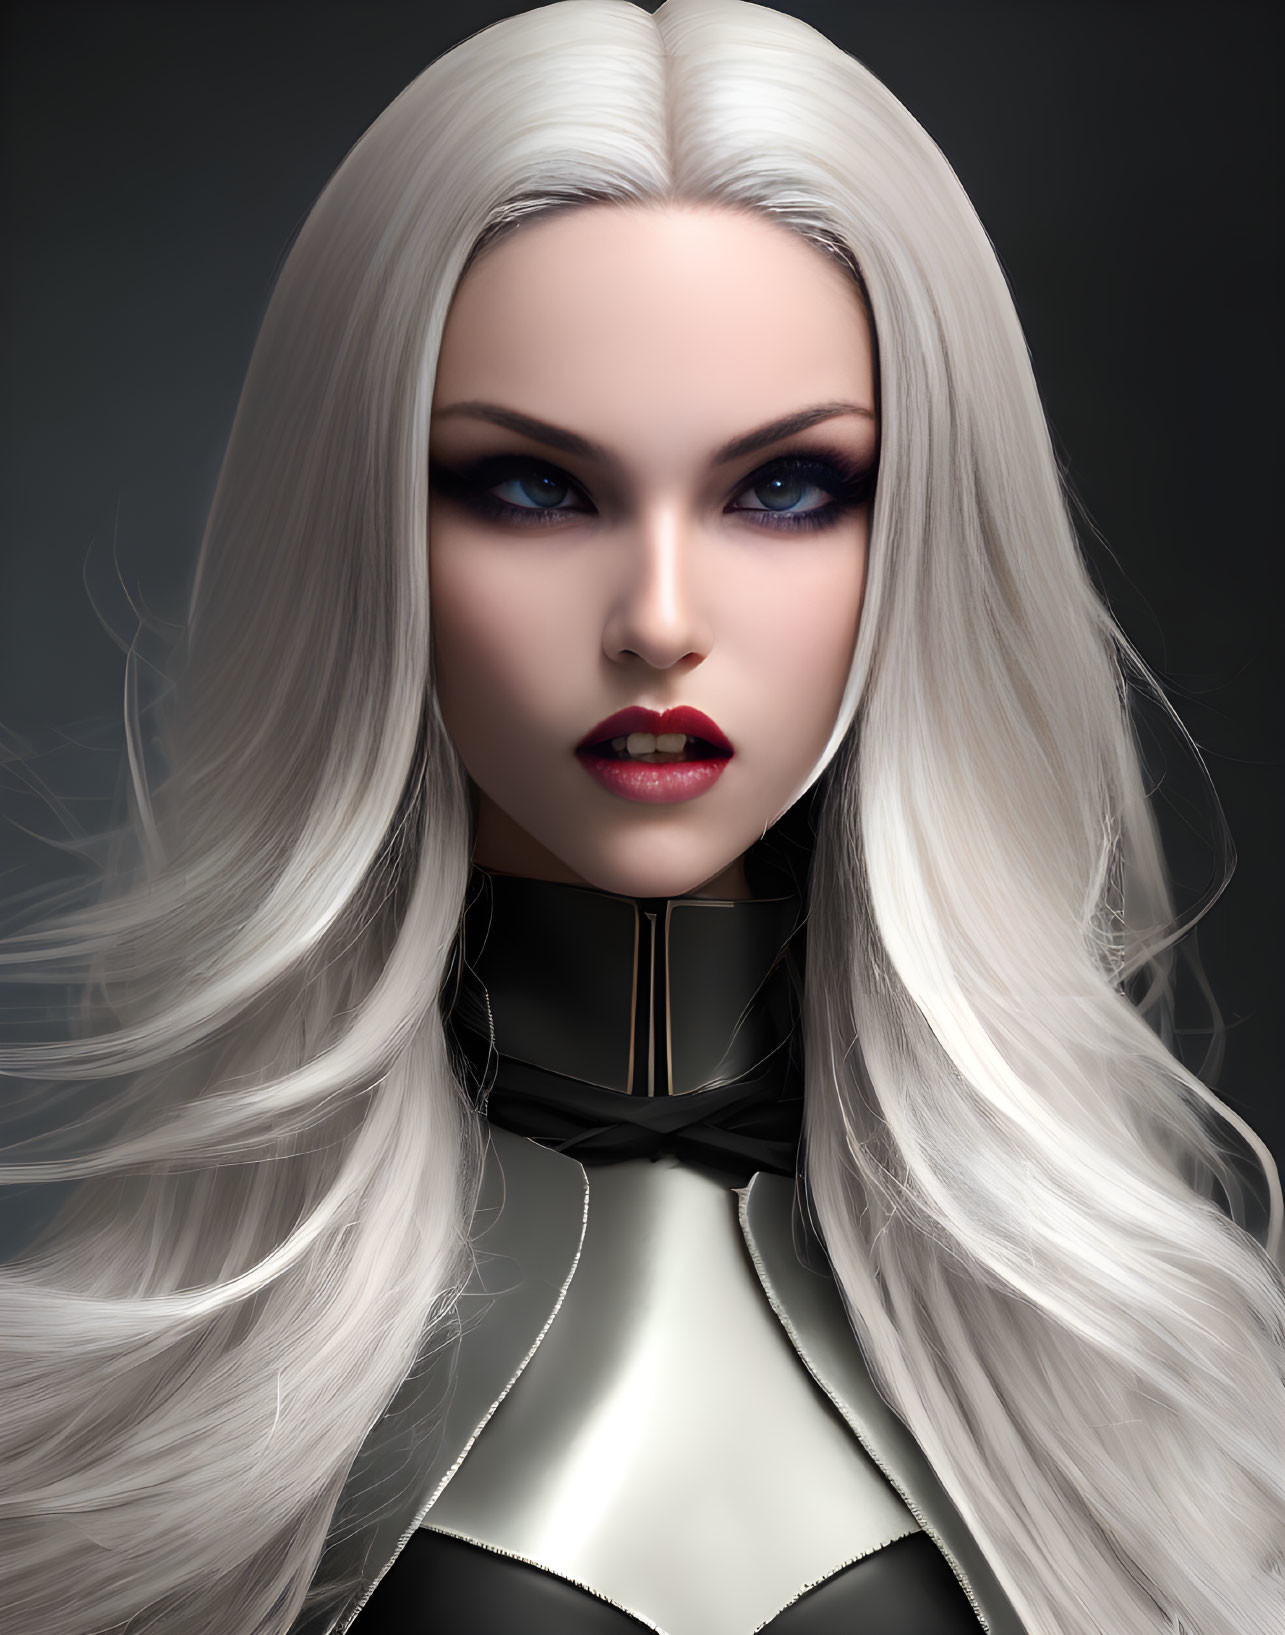 Woman with long white hair and blue eyes in black and white bodysuit